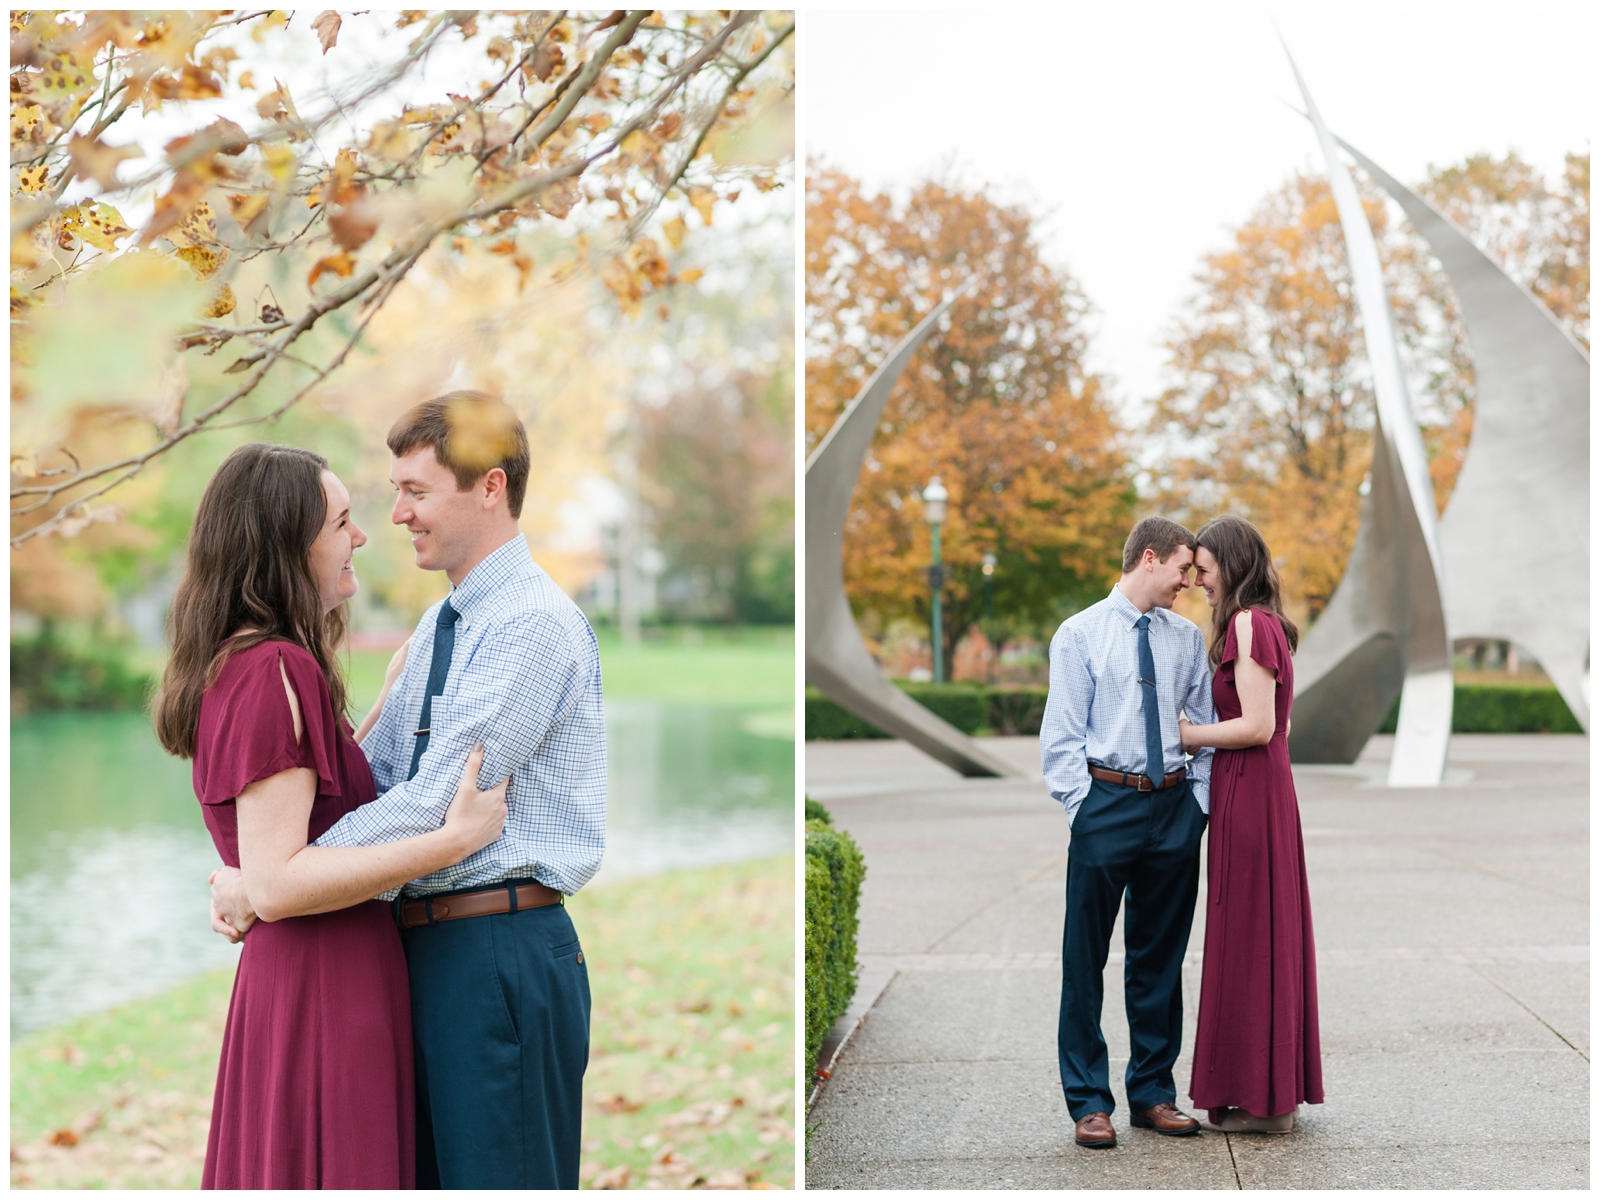 Beautiful fall Franklin Park Conservatory Engagement Session. two photos both with an engaged couple looking at each other in formalwear 